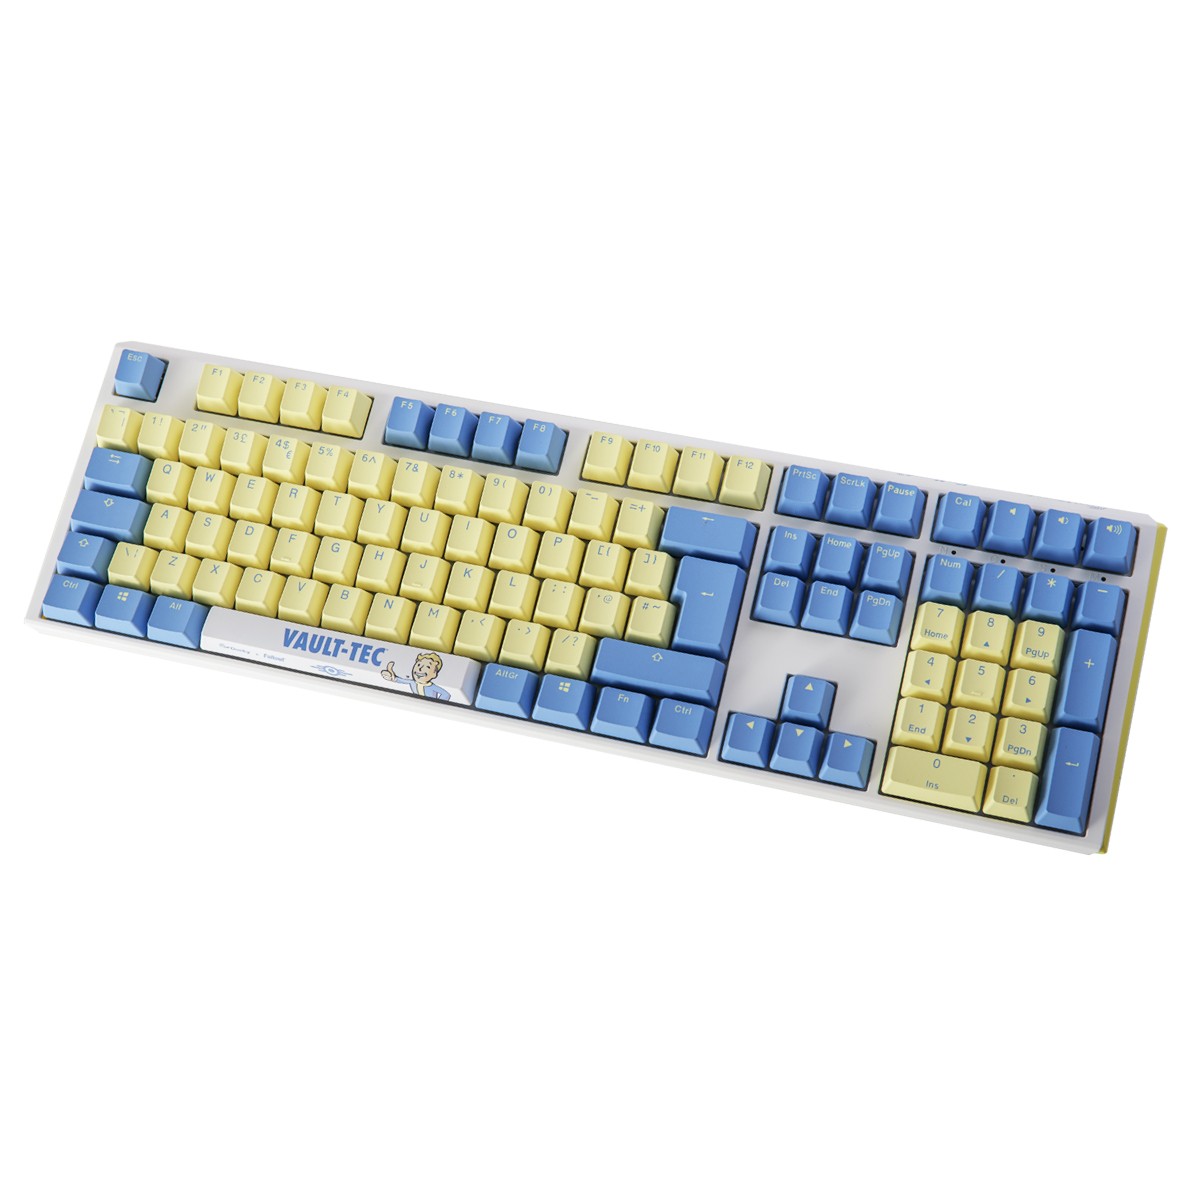 Ducky x Fallout One 3 RGB LE Cherry Silent Red Switch Mechanical Gaming Keyboard UK Layout